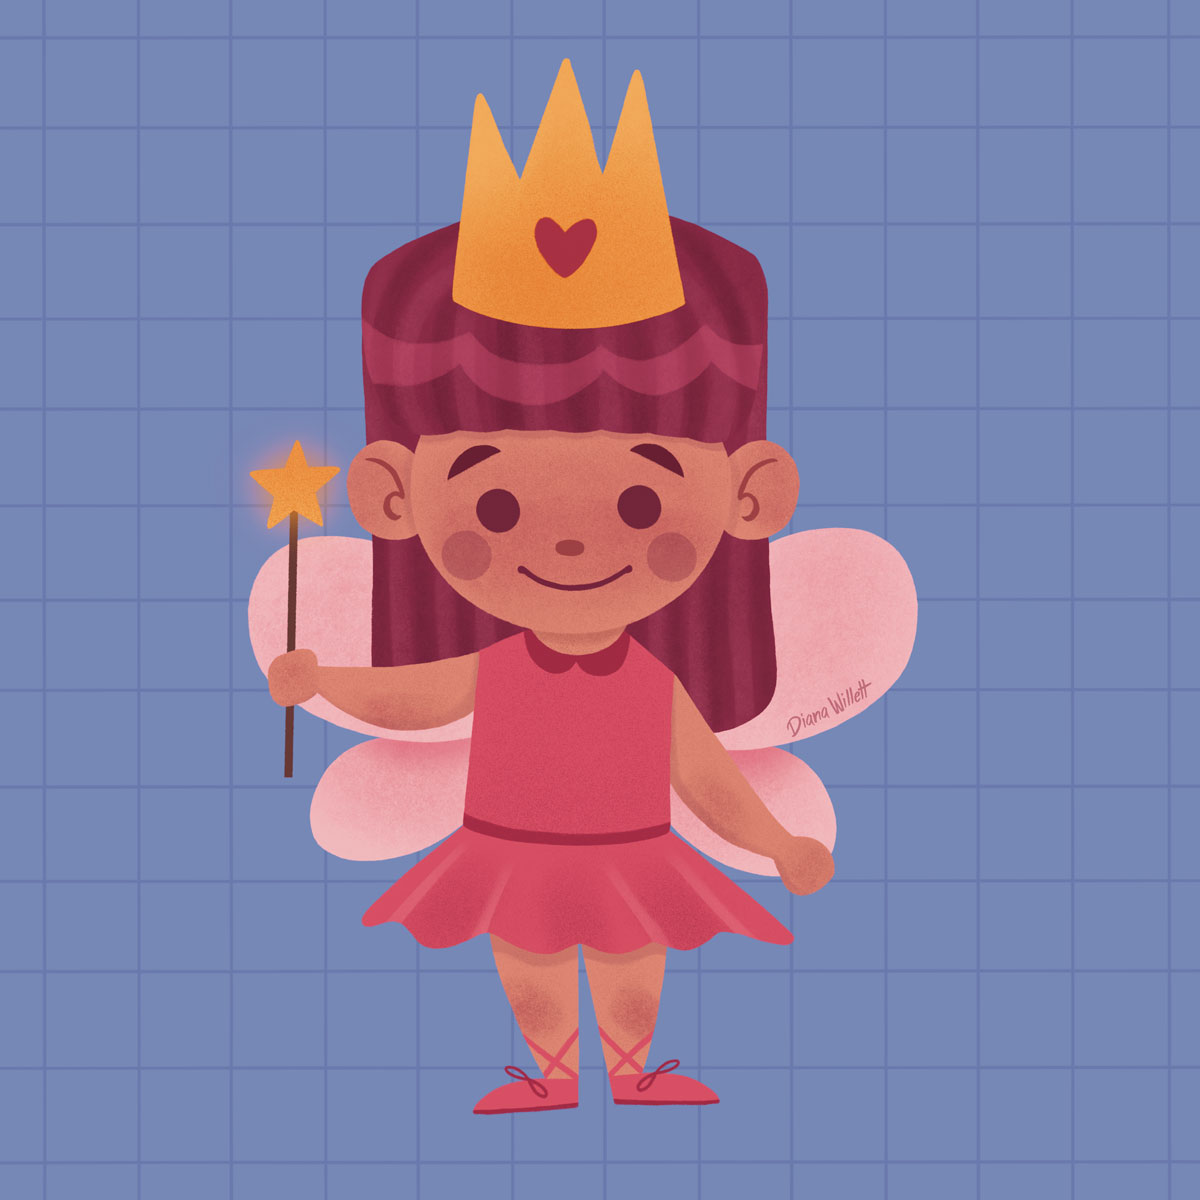 Kidlit Illustration by Diana Willett of child dressed as a fairy princess